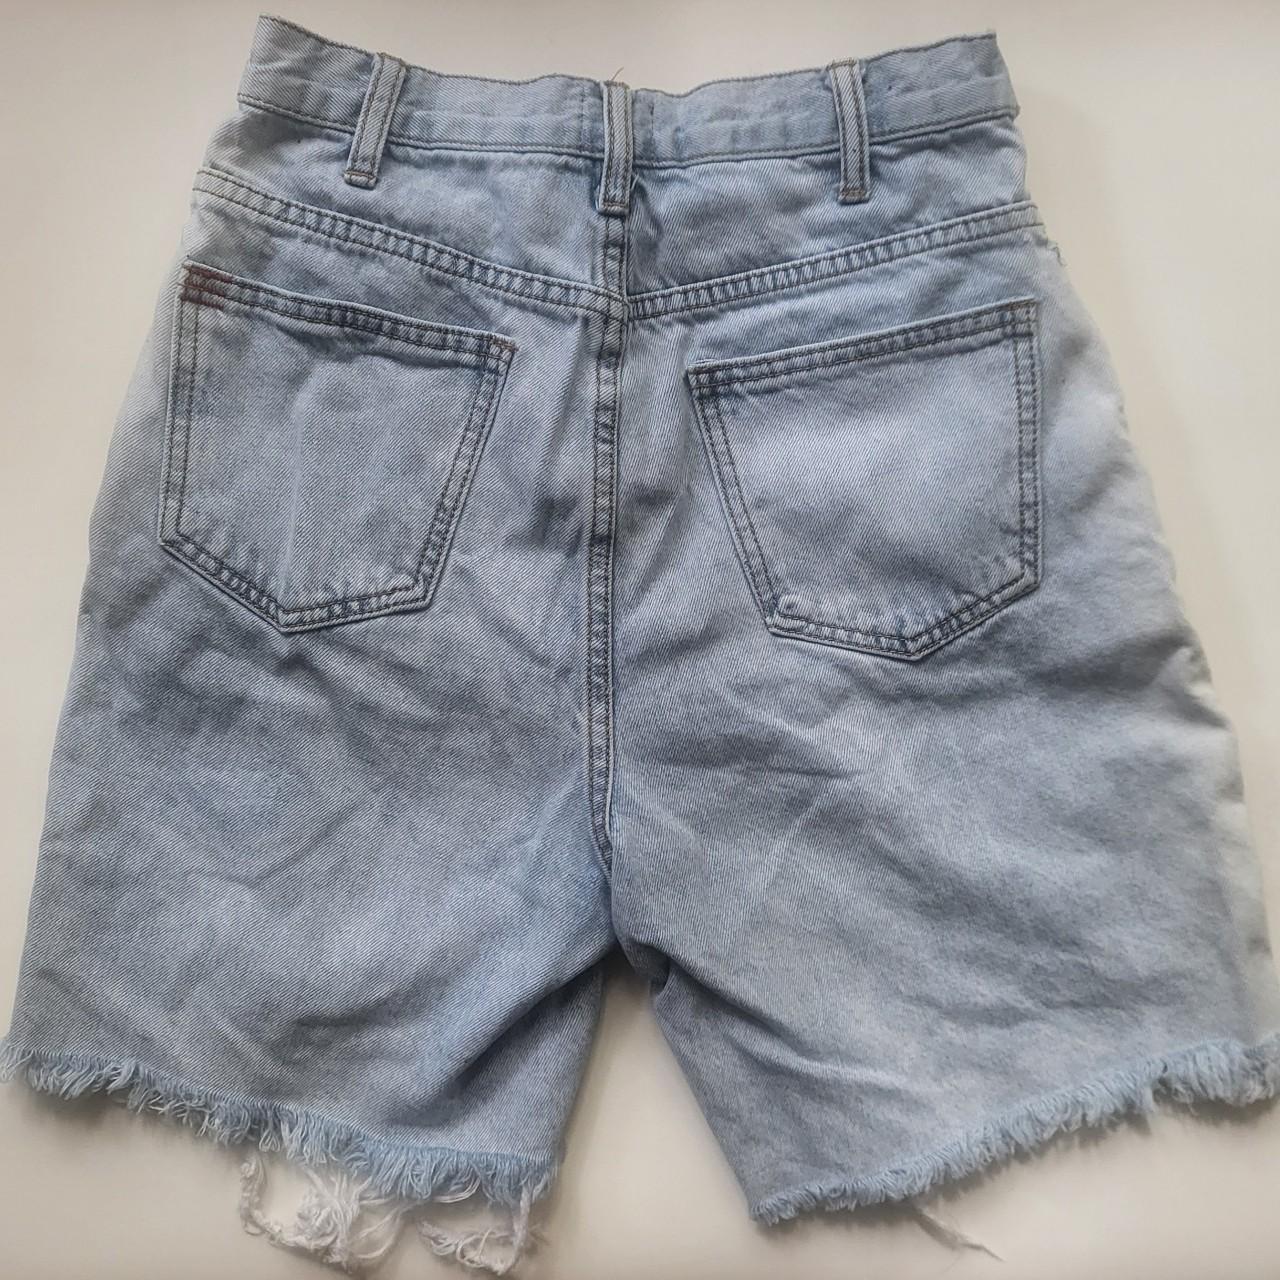 BDG - JORTS - URBAN OUTFITTERS - SIZE 27 - Depop